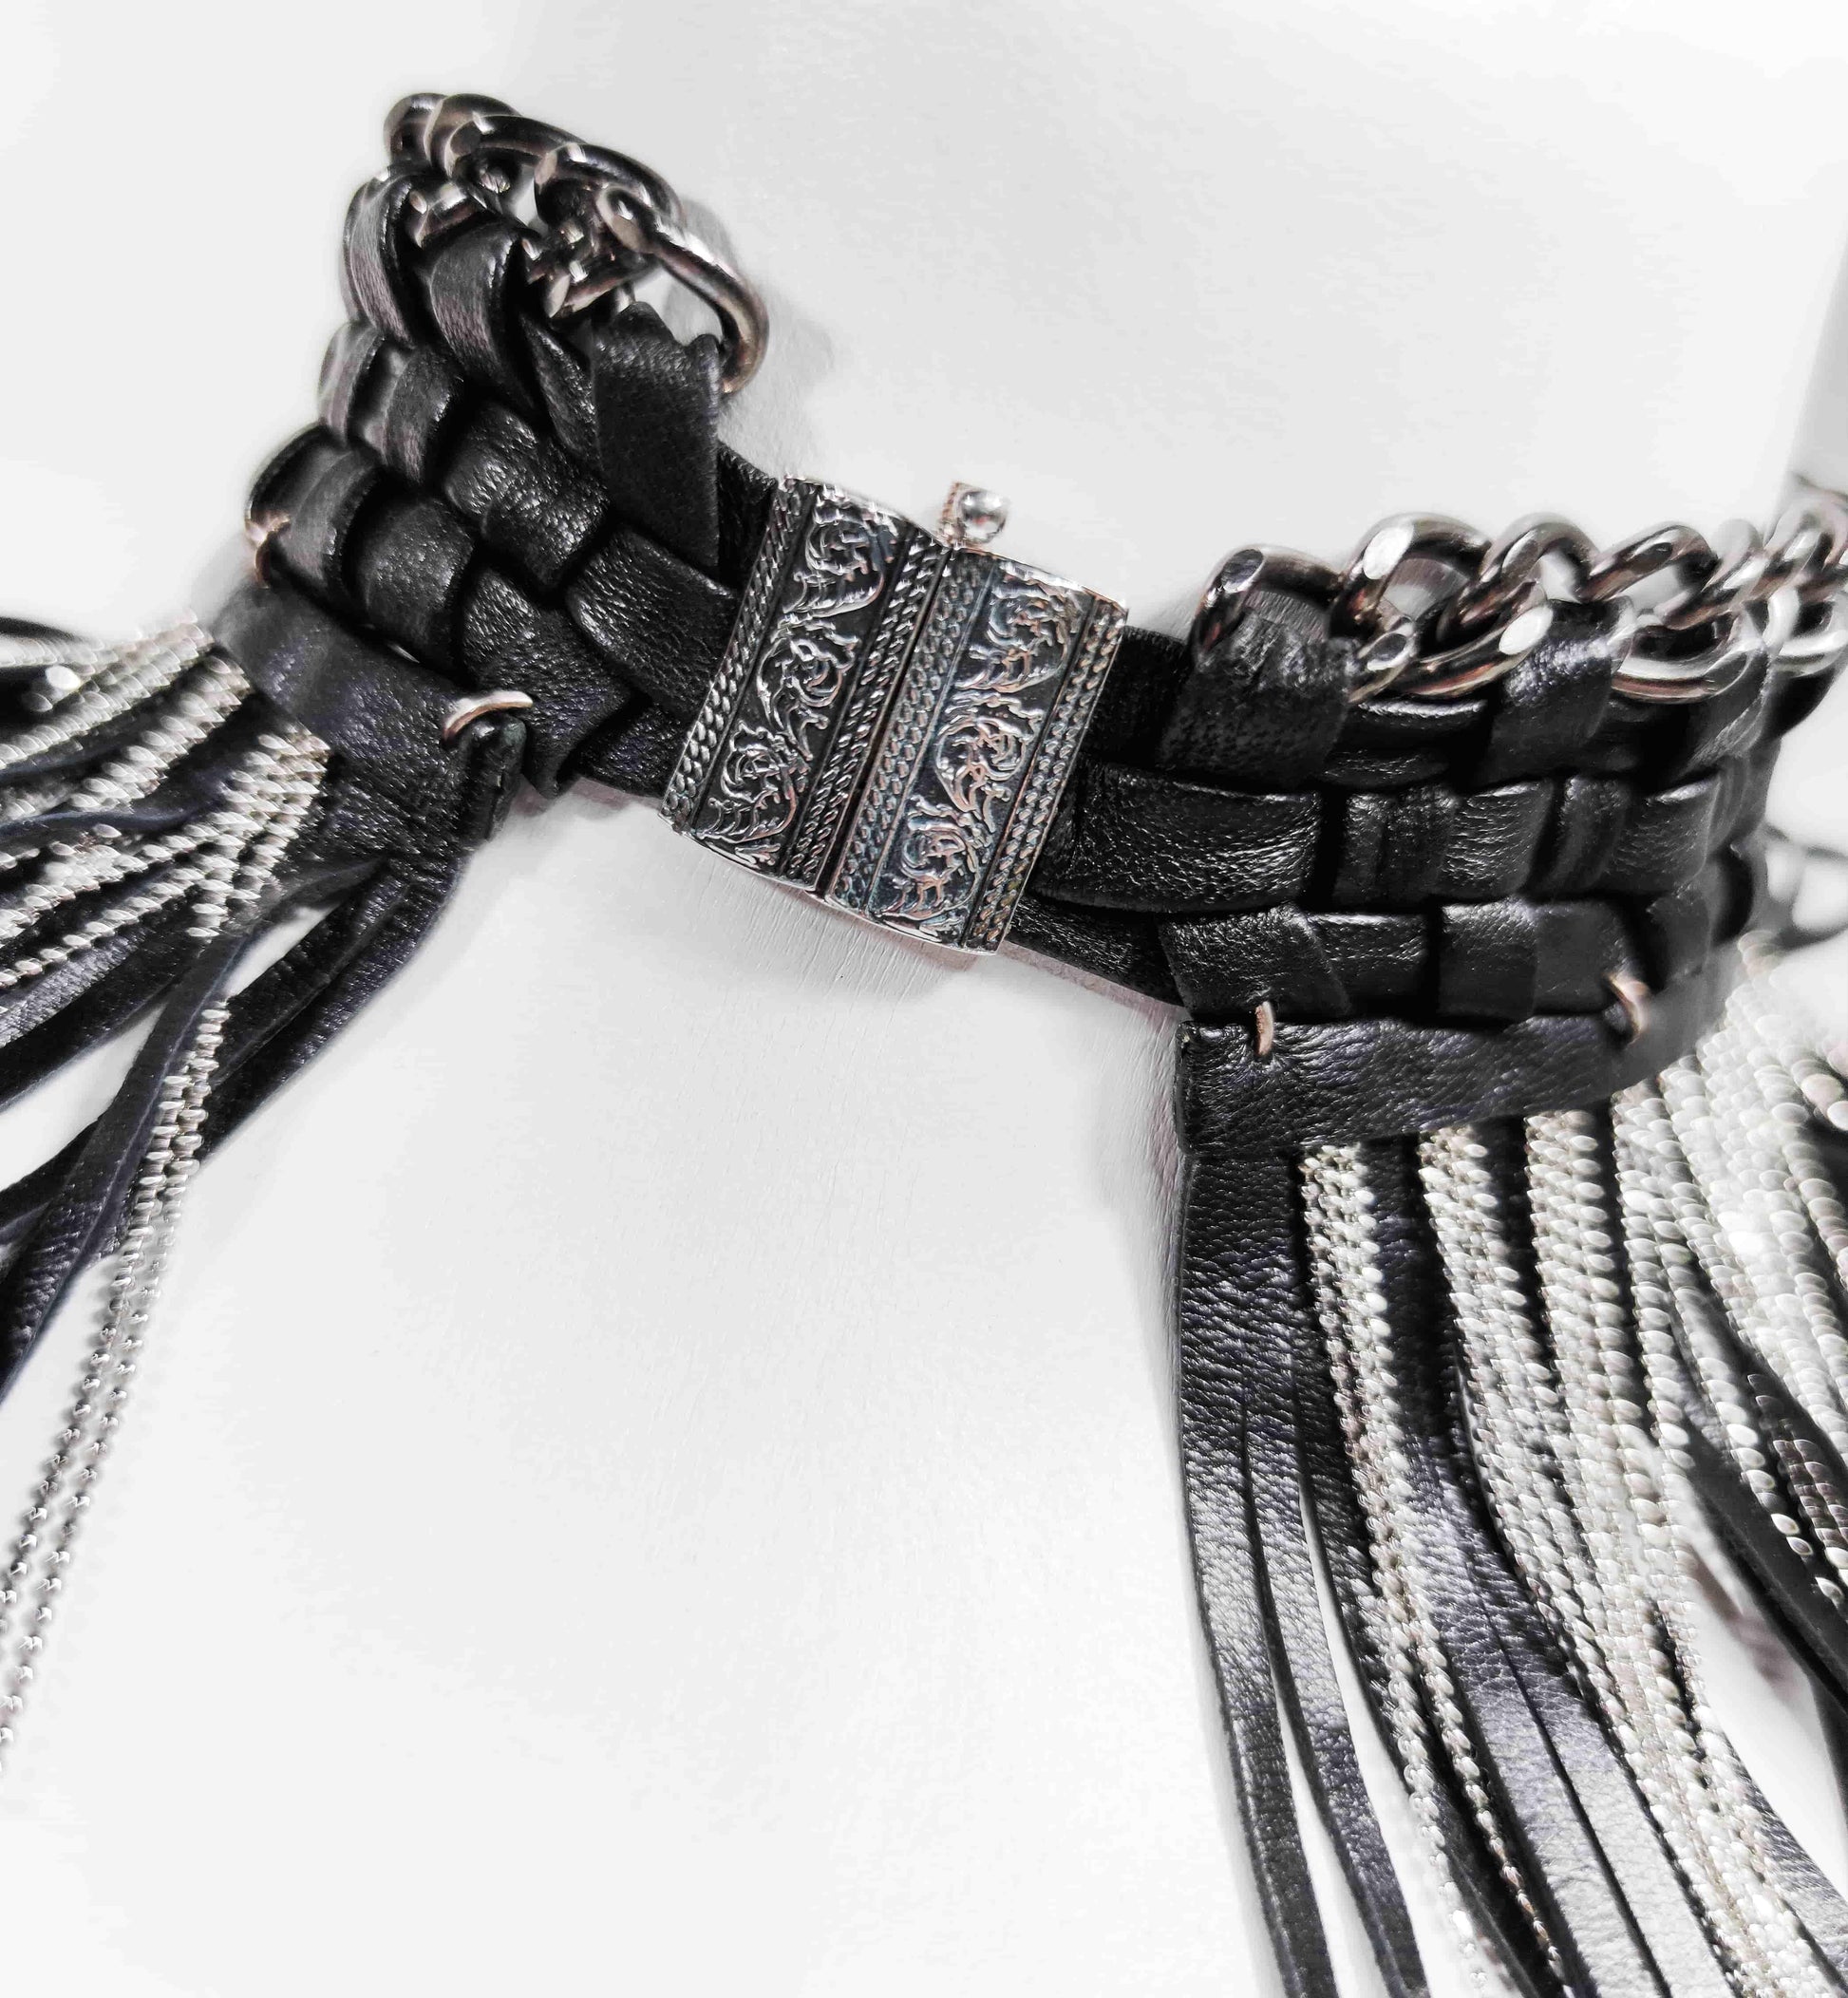 Exquisite detail of Long Braided Leather Chocker with Leather Fringe and Chains showcasing the fine craftsmanship and elegant design characteristic of Axinia Collection 's luxury collection.